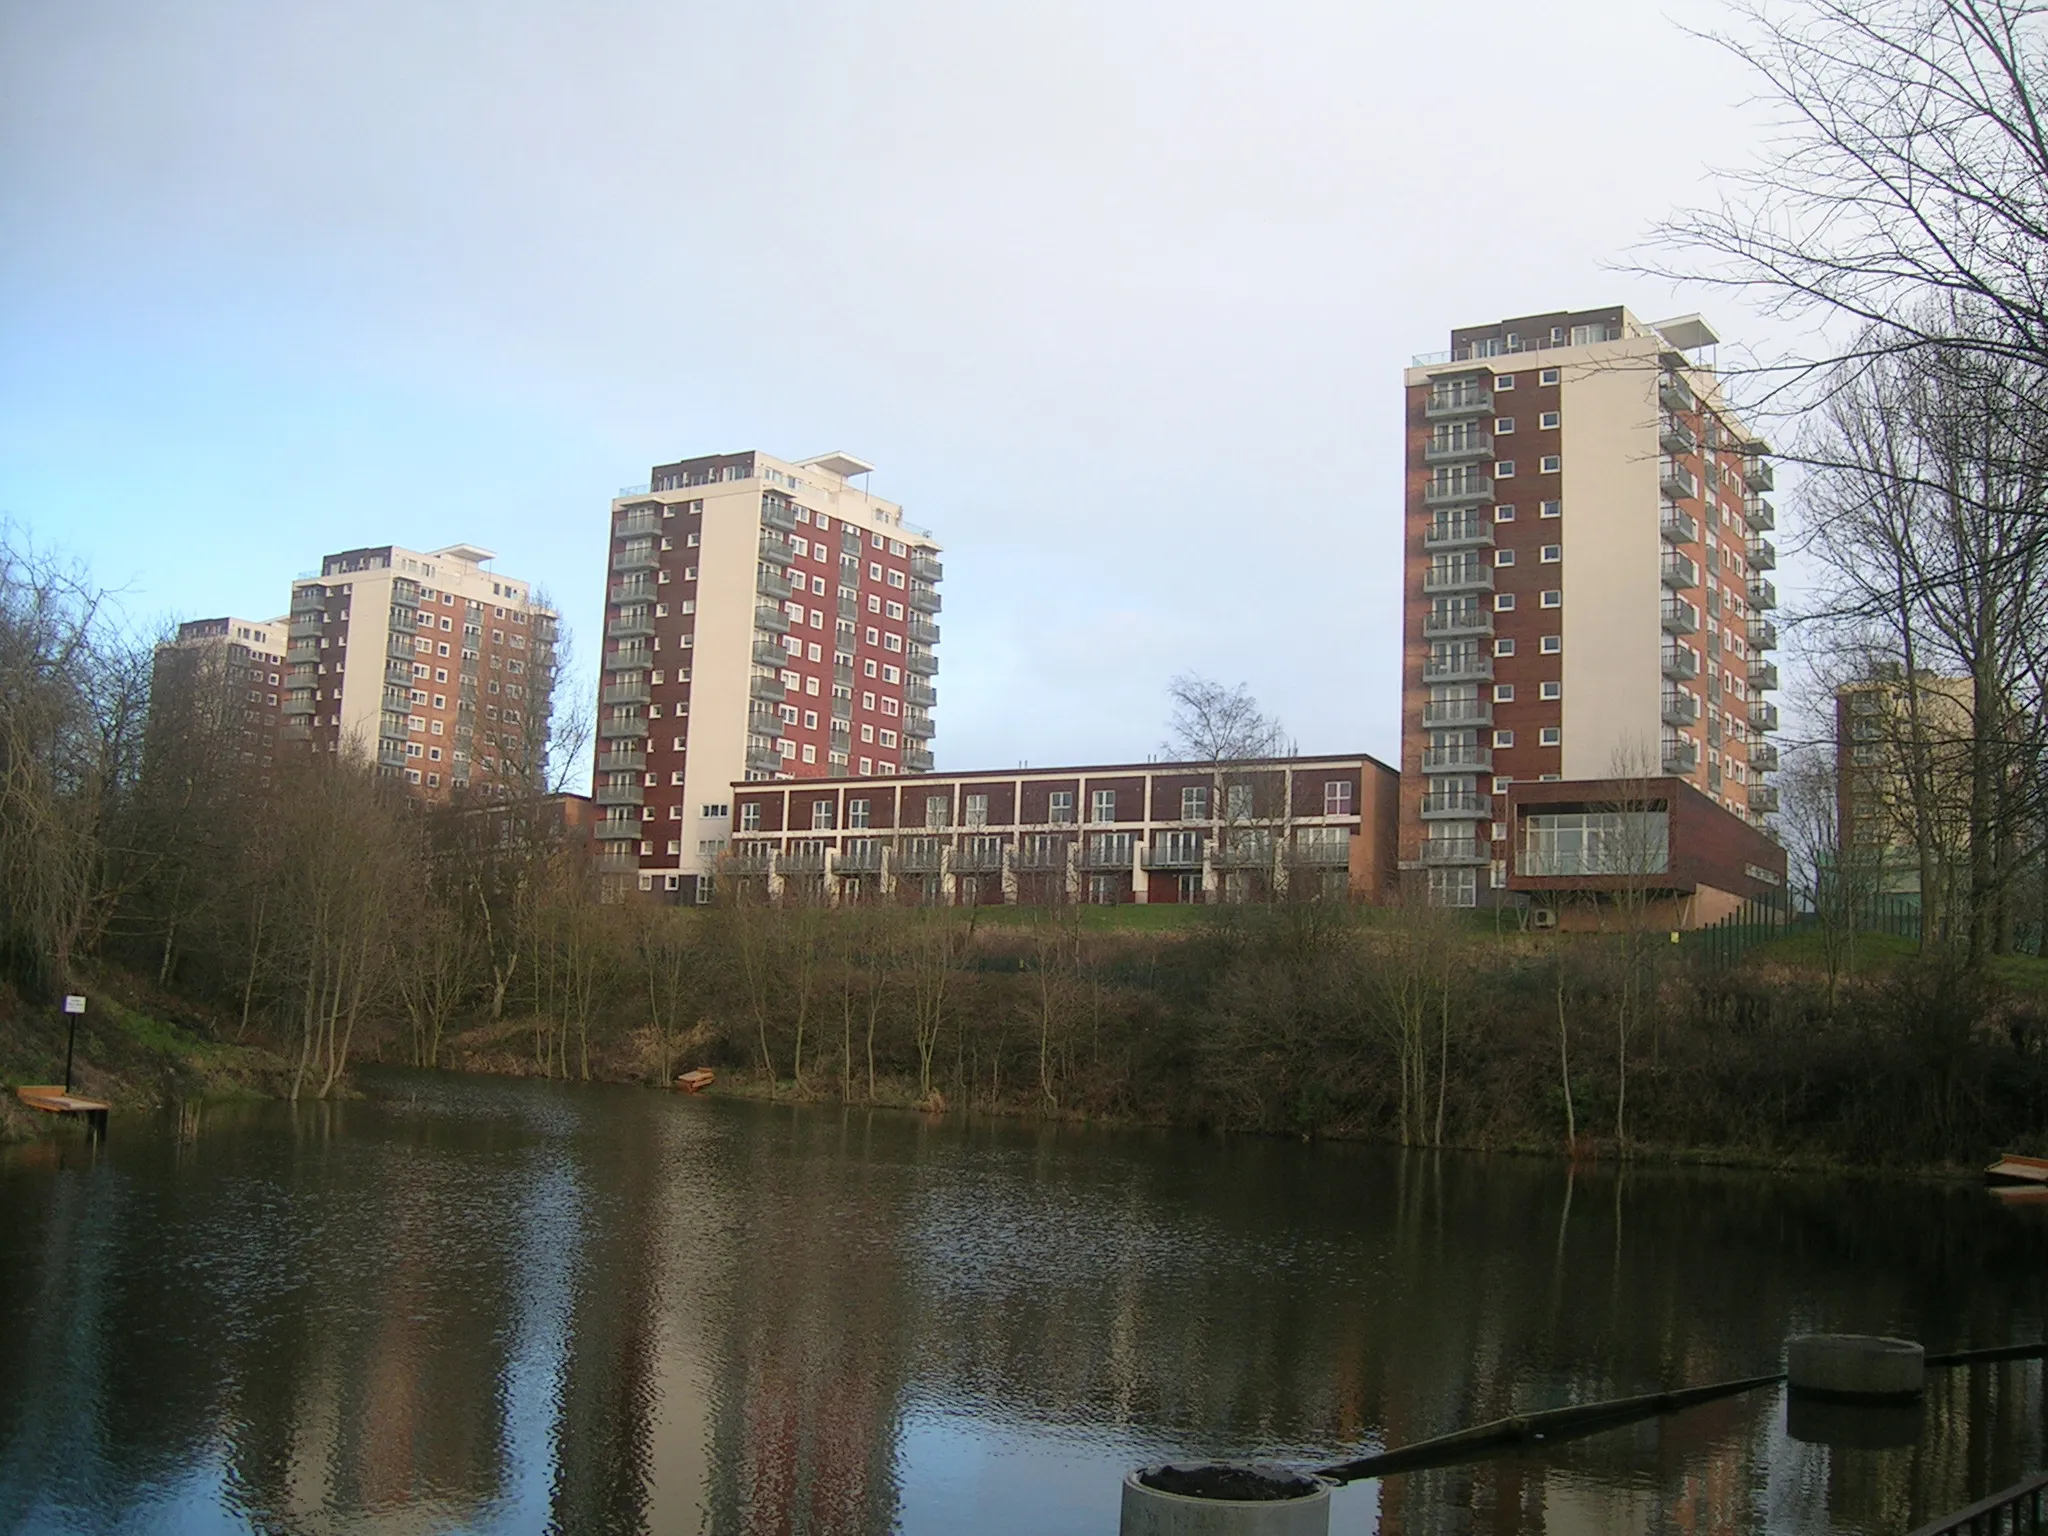 Photo showing: A view of Blackley, in Manchester, England.

These are originally council homes built by Manchester City Council in the 1960s.